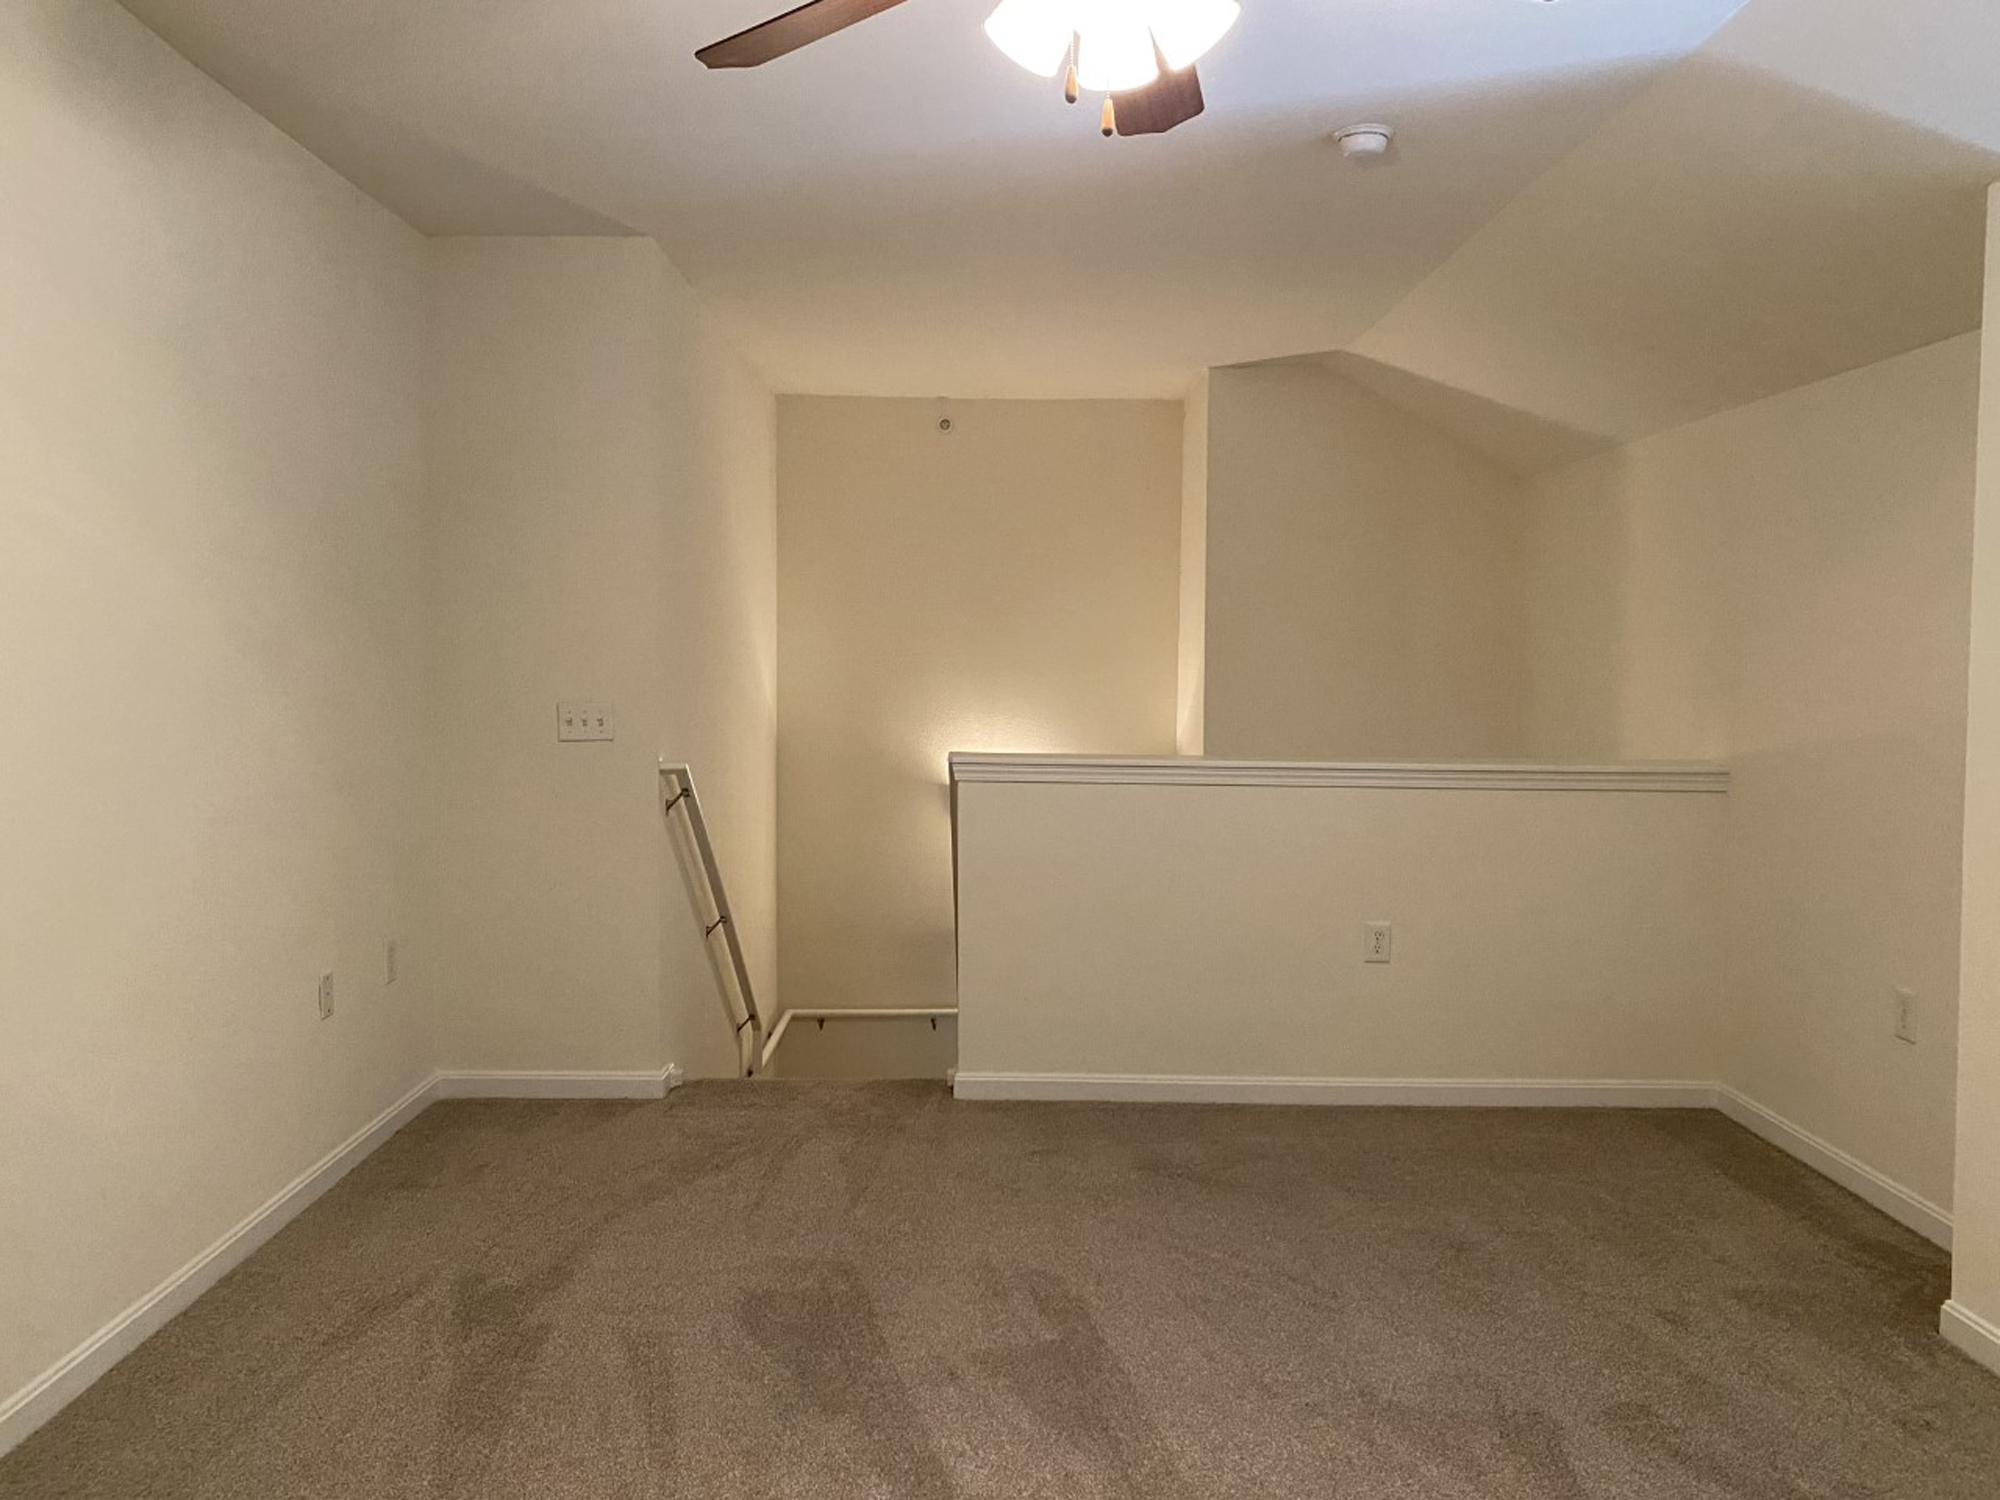 Carpeted floors and ceiling fan